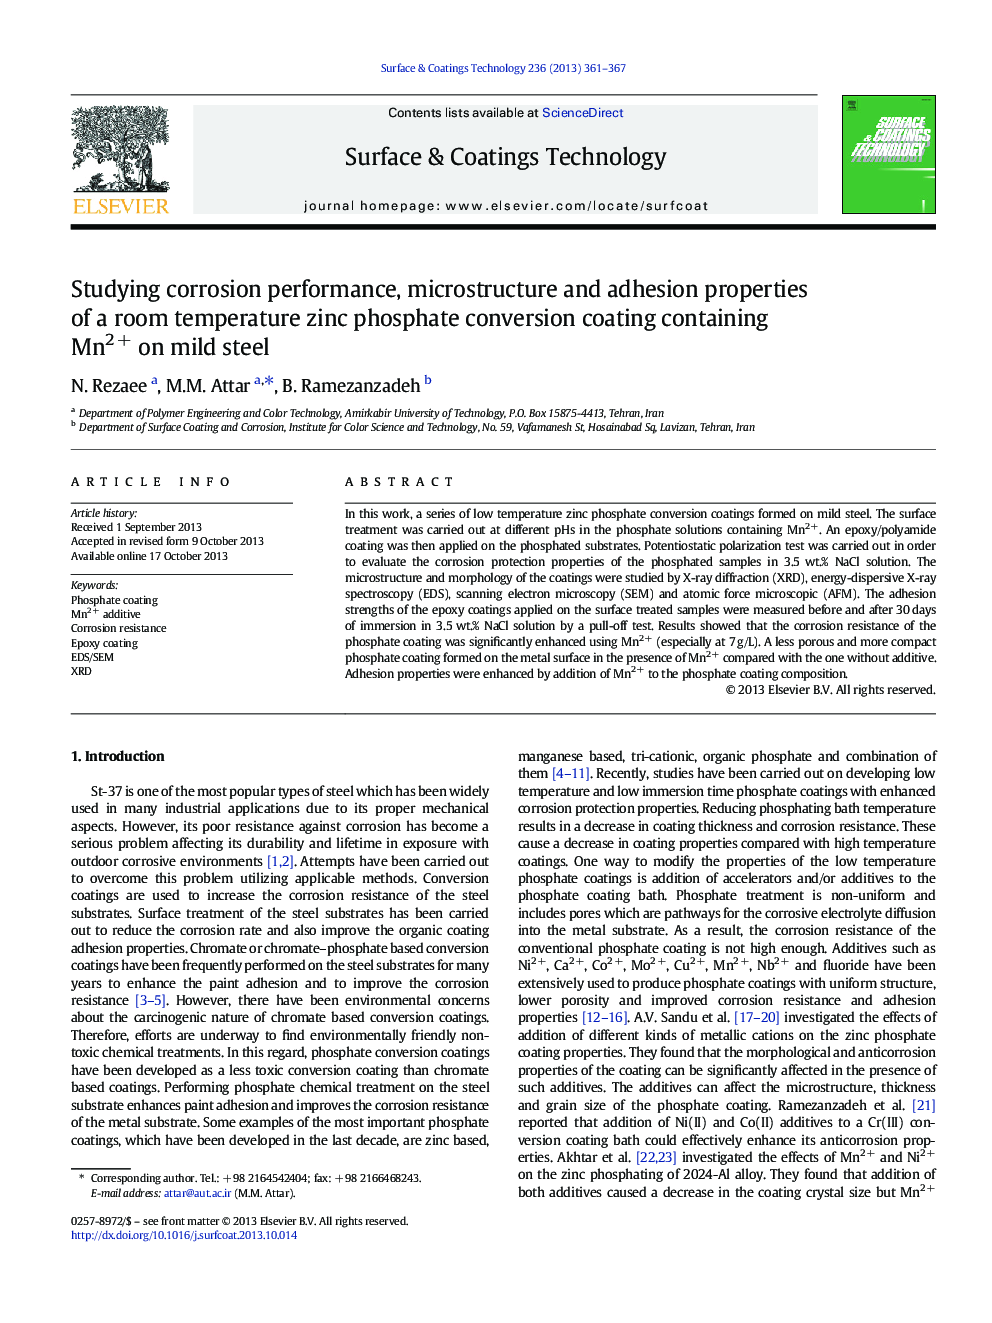 Studying corrosion performance, microstructure and adhesion properties of a room temperature zinc phosphate conversion coating containing Mn2Â + on mild steel